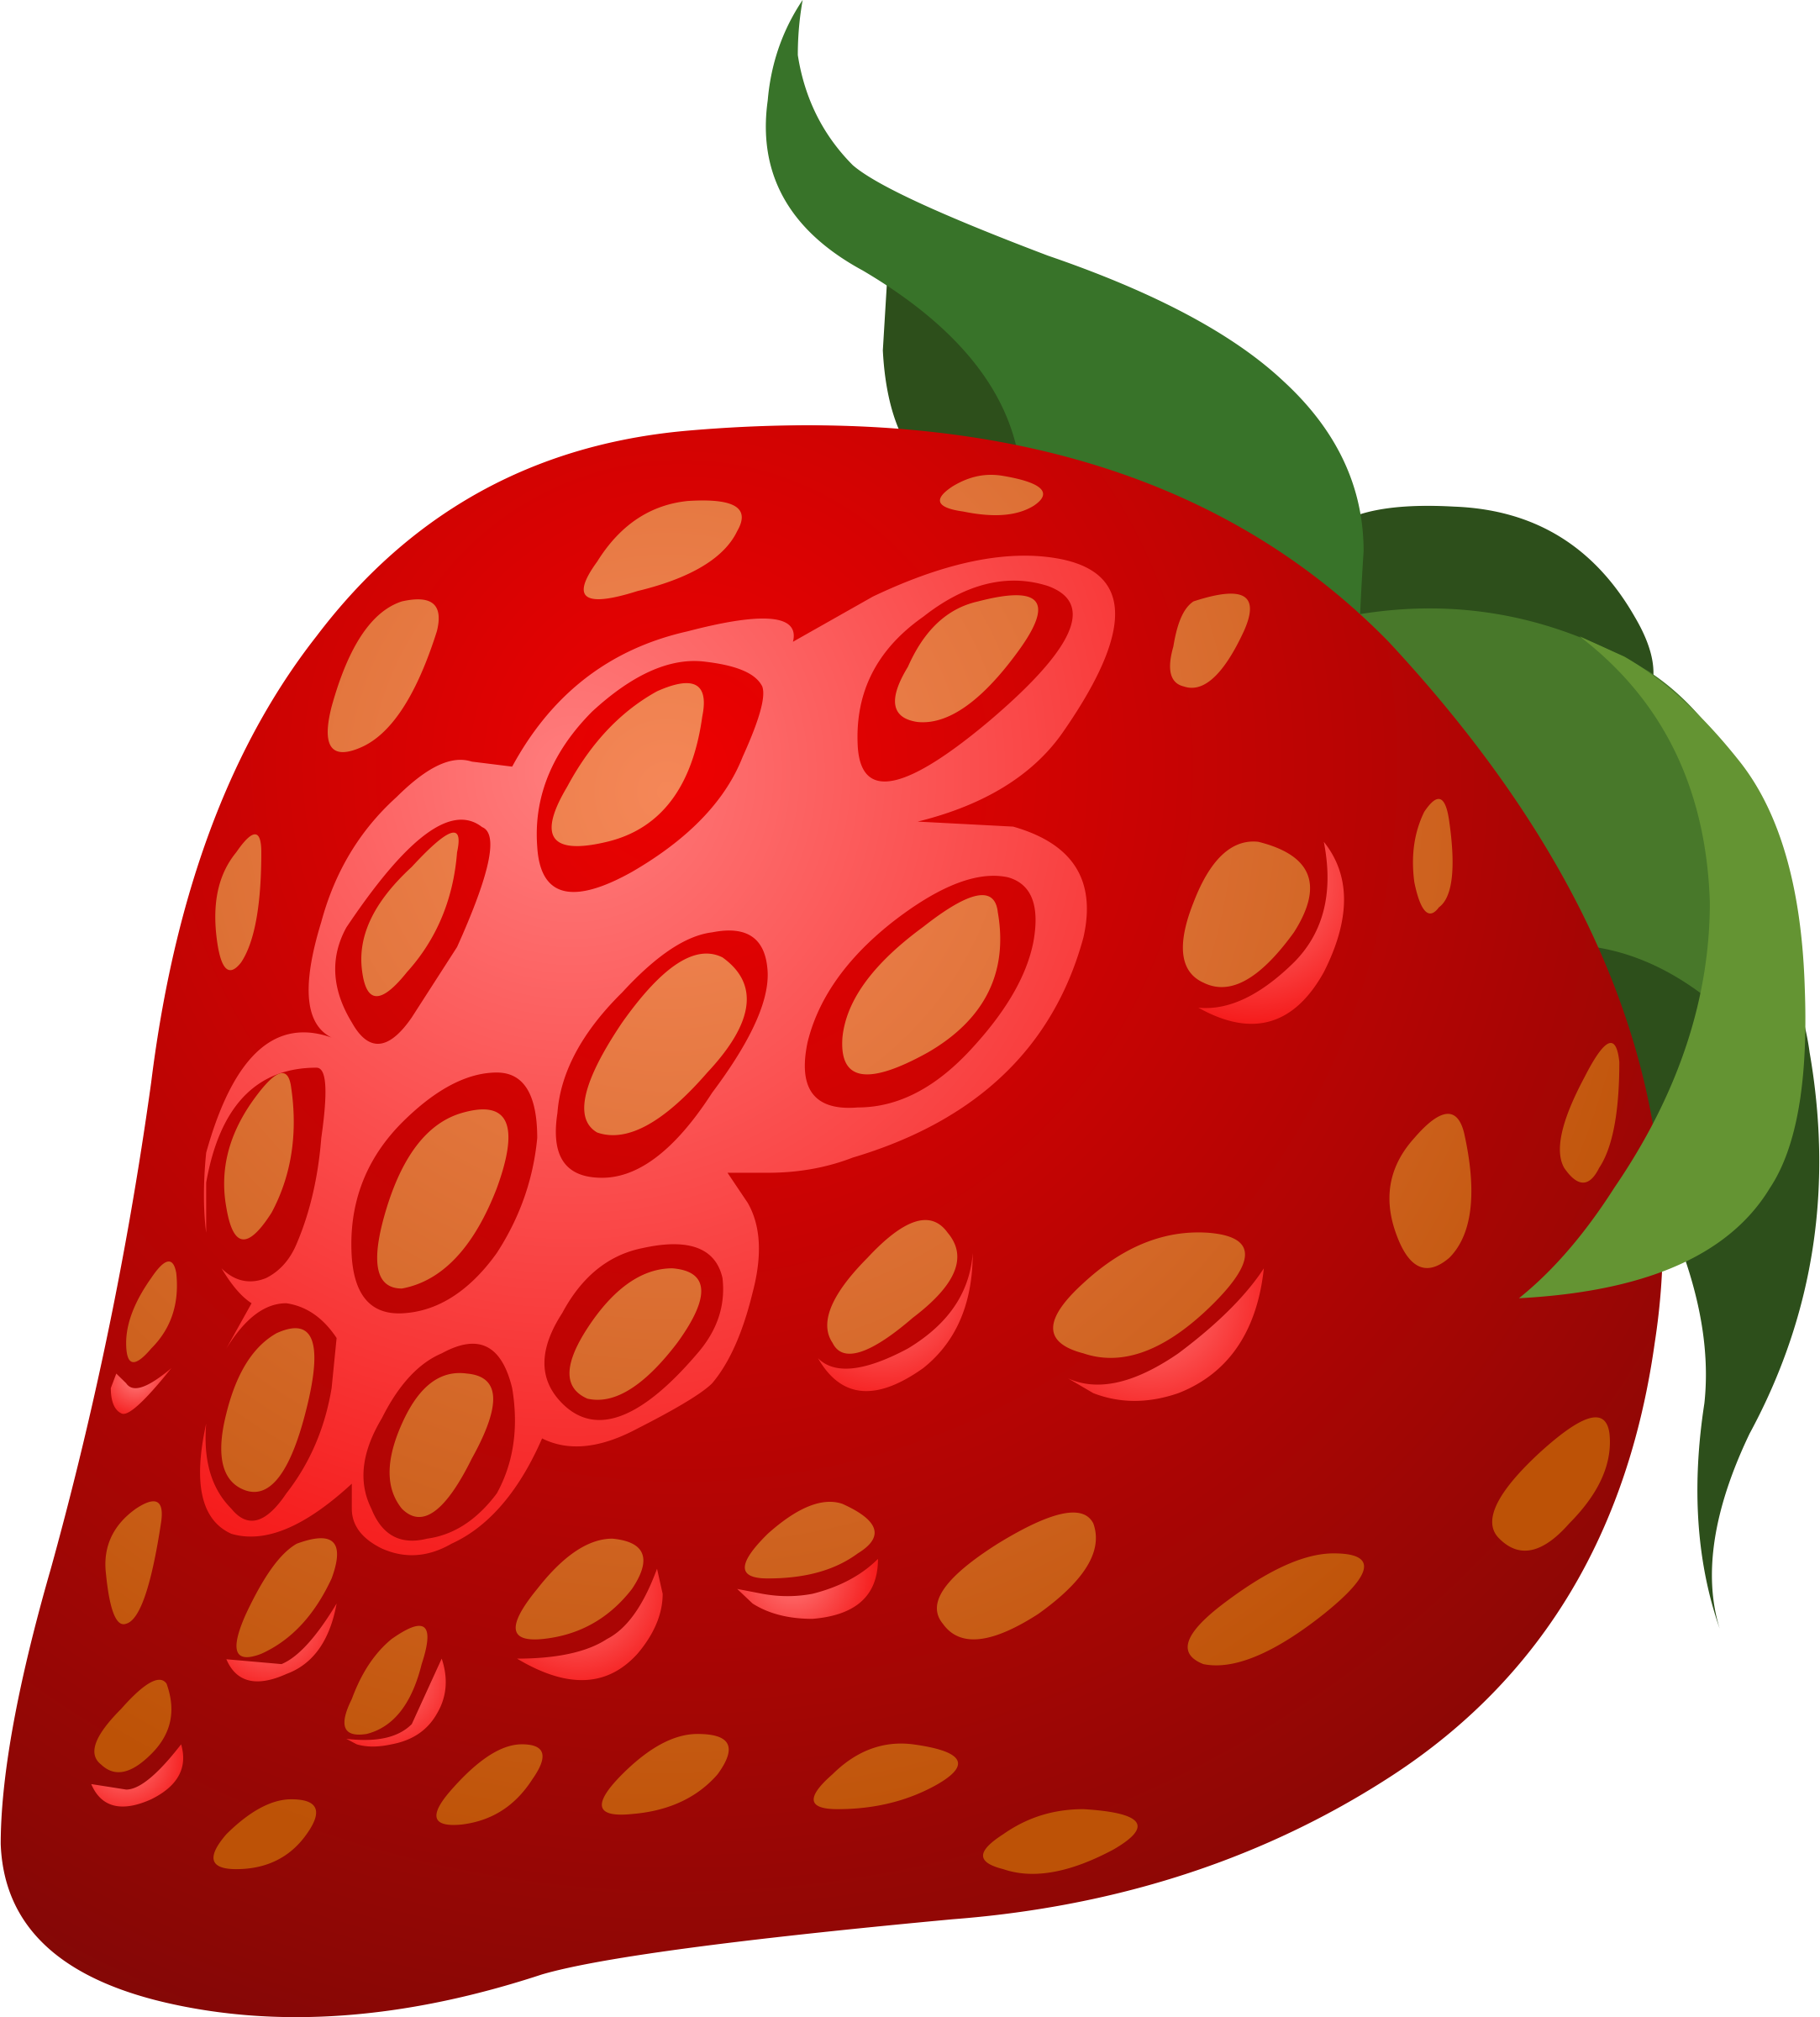 Strawberries clipart cool. Food strawberry by glitch